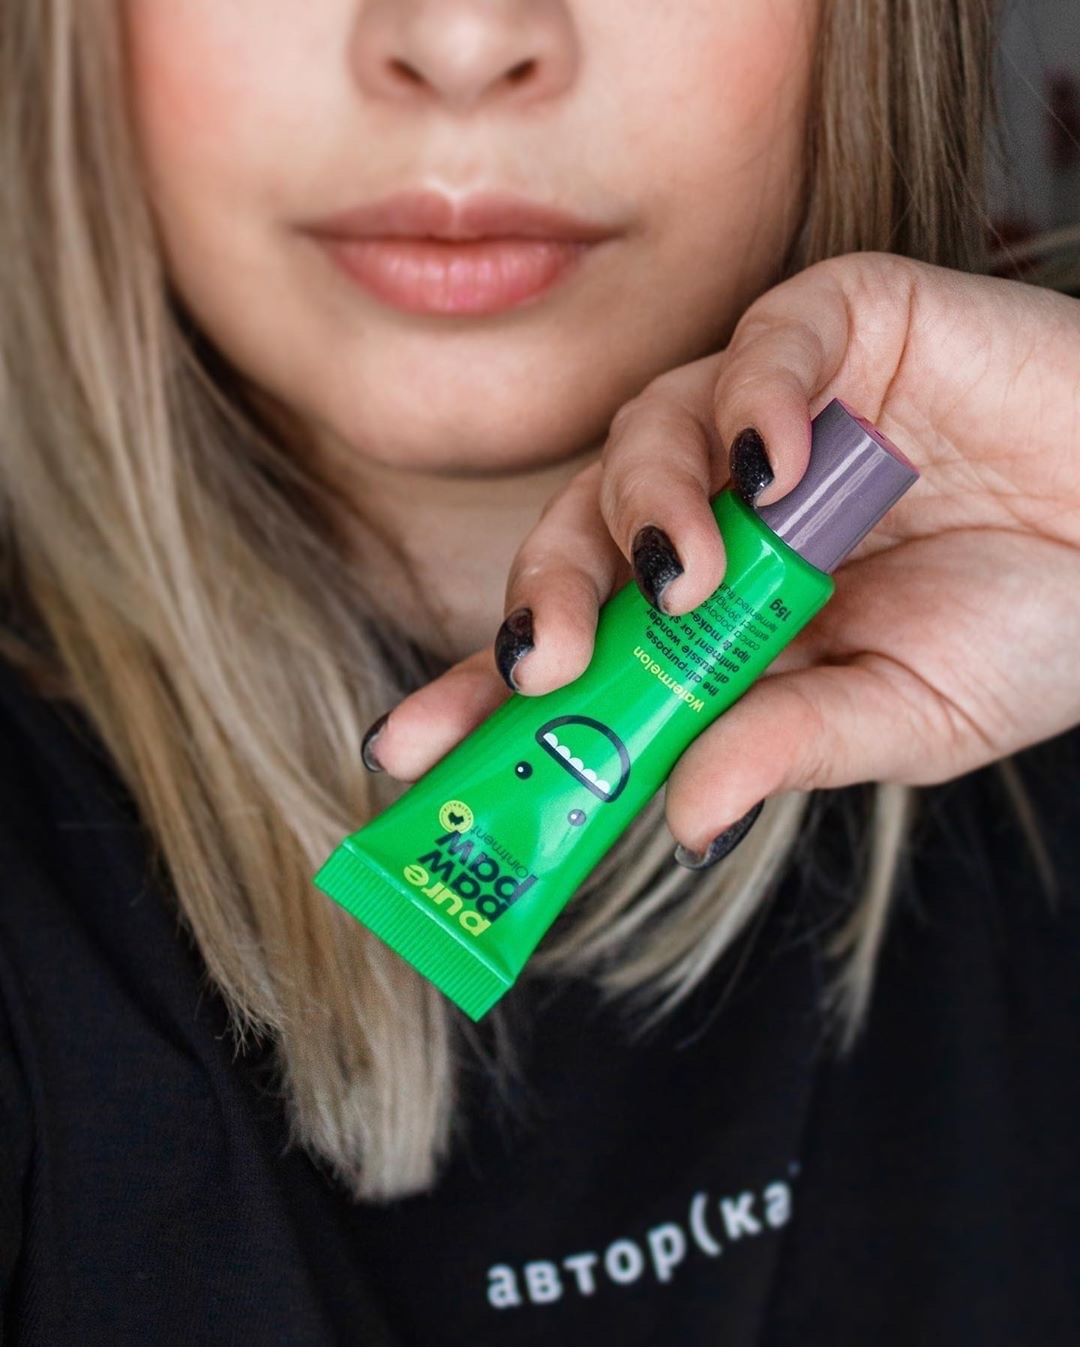 Pure Paw Paw - "I will fix your sore dry lips, AND, i will photo bomb your selfie - upside down." - Watermelon 🍉 ⠀⠀⠀⠀⠀⠀⠀⠀⠀
#purepawpaw #lipservice #allrounder #beautymusthave #beautyointment #fruityfl...